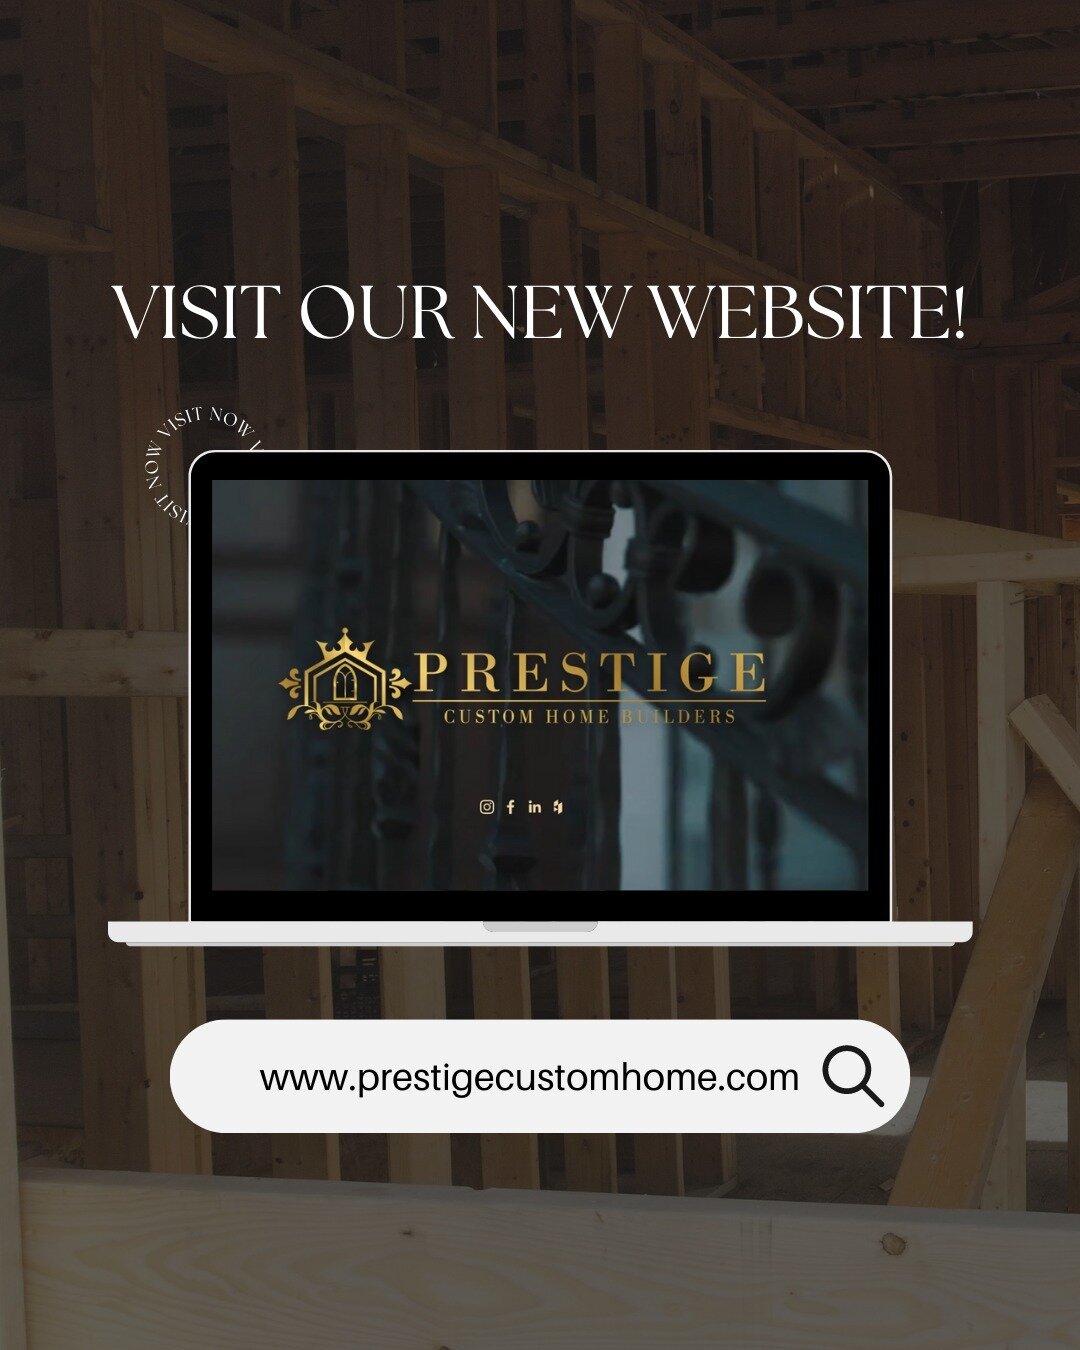 WE'RE LIVE! Check out our website: www.prestigecustomhome.com! 🔥
----------------------------------⁠⁠⠀⠀
Interested in building your dream home? Contact us! 
☎️: (416) 816-4313
✉️ info@prestigecustomhome.com
----------------------------------⁠⁠⠀⠀
.
.